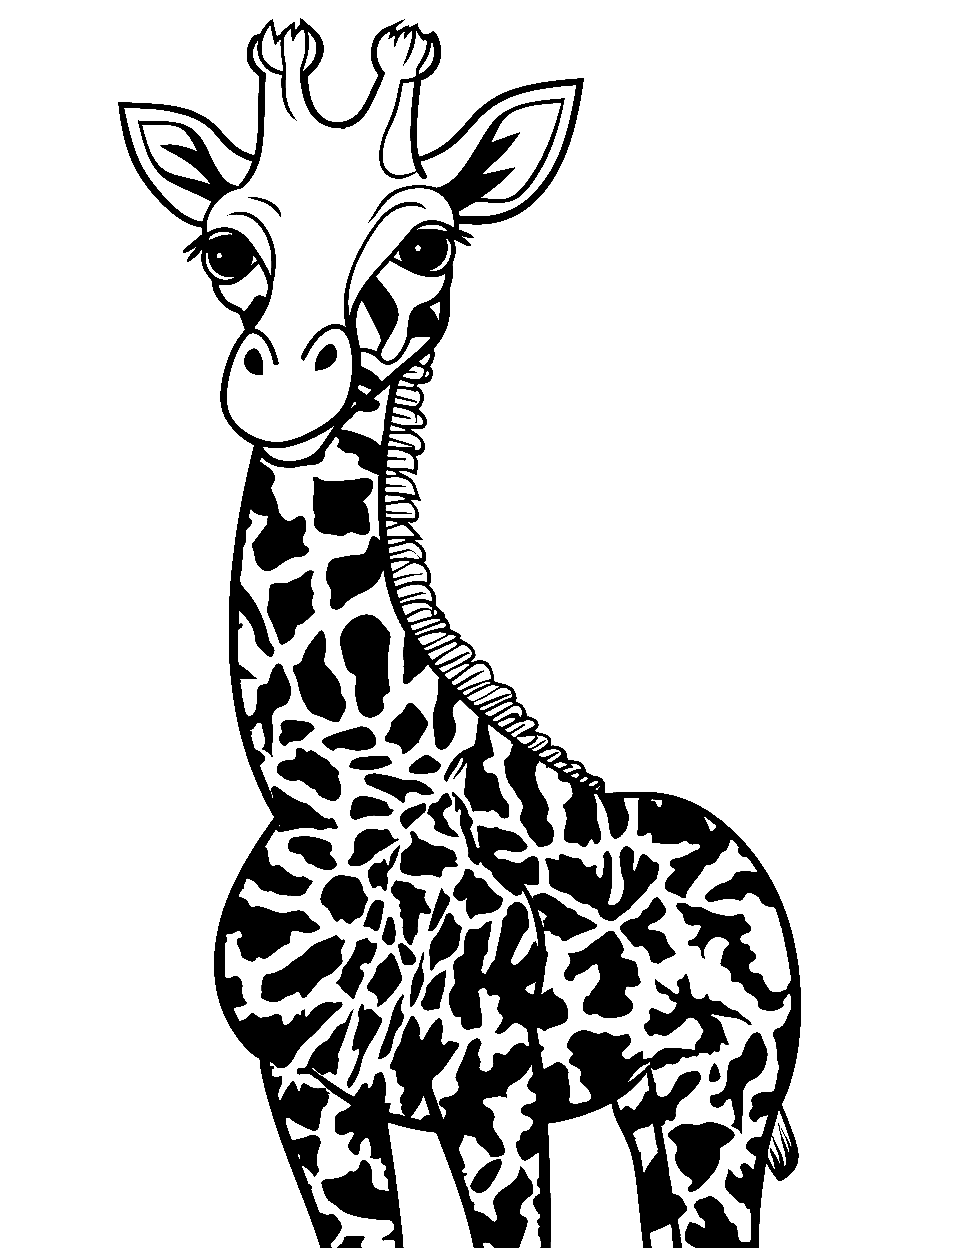 Complex Giraffe Patterns Coloring Page - A giraffe filled with complex patterns.